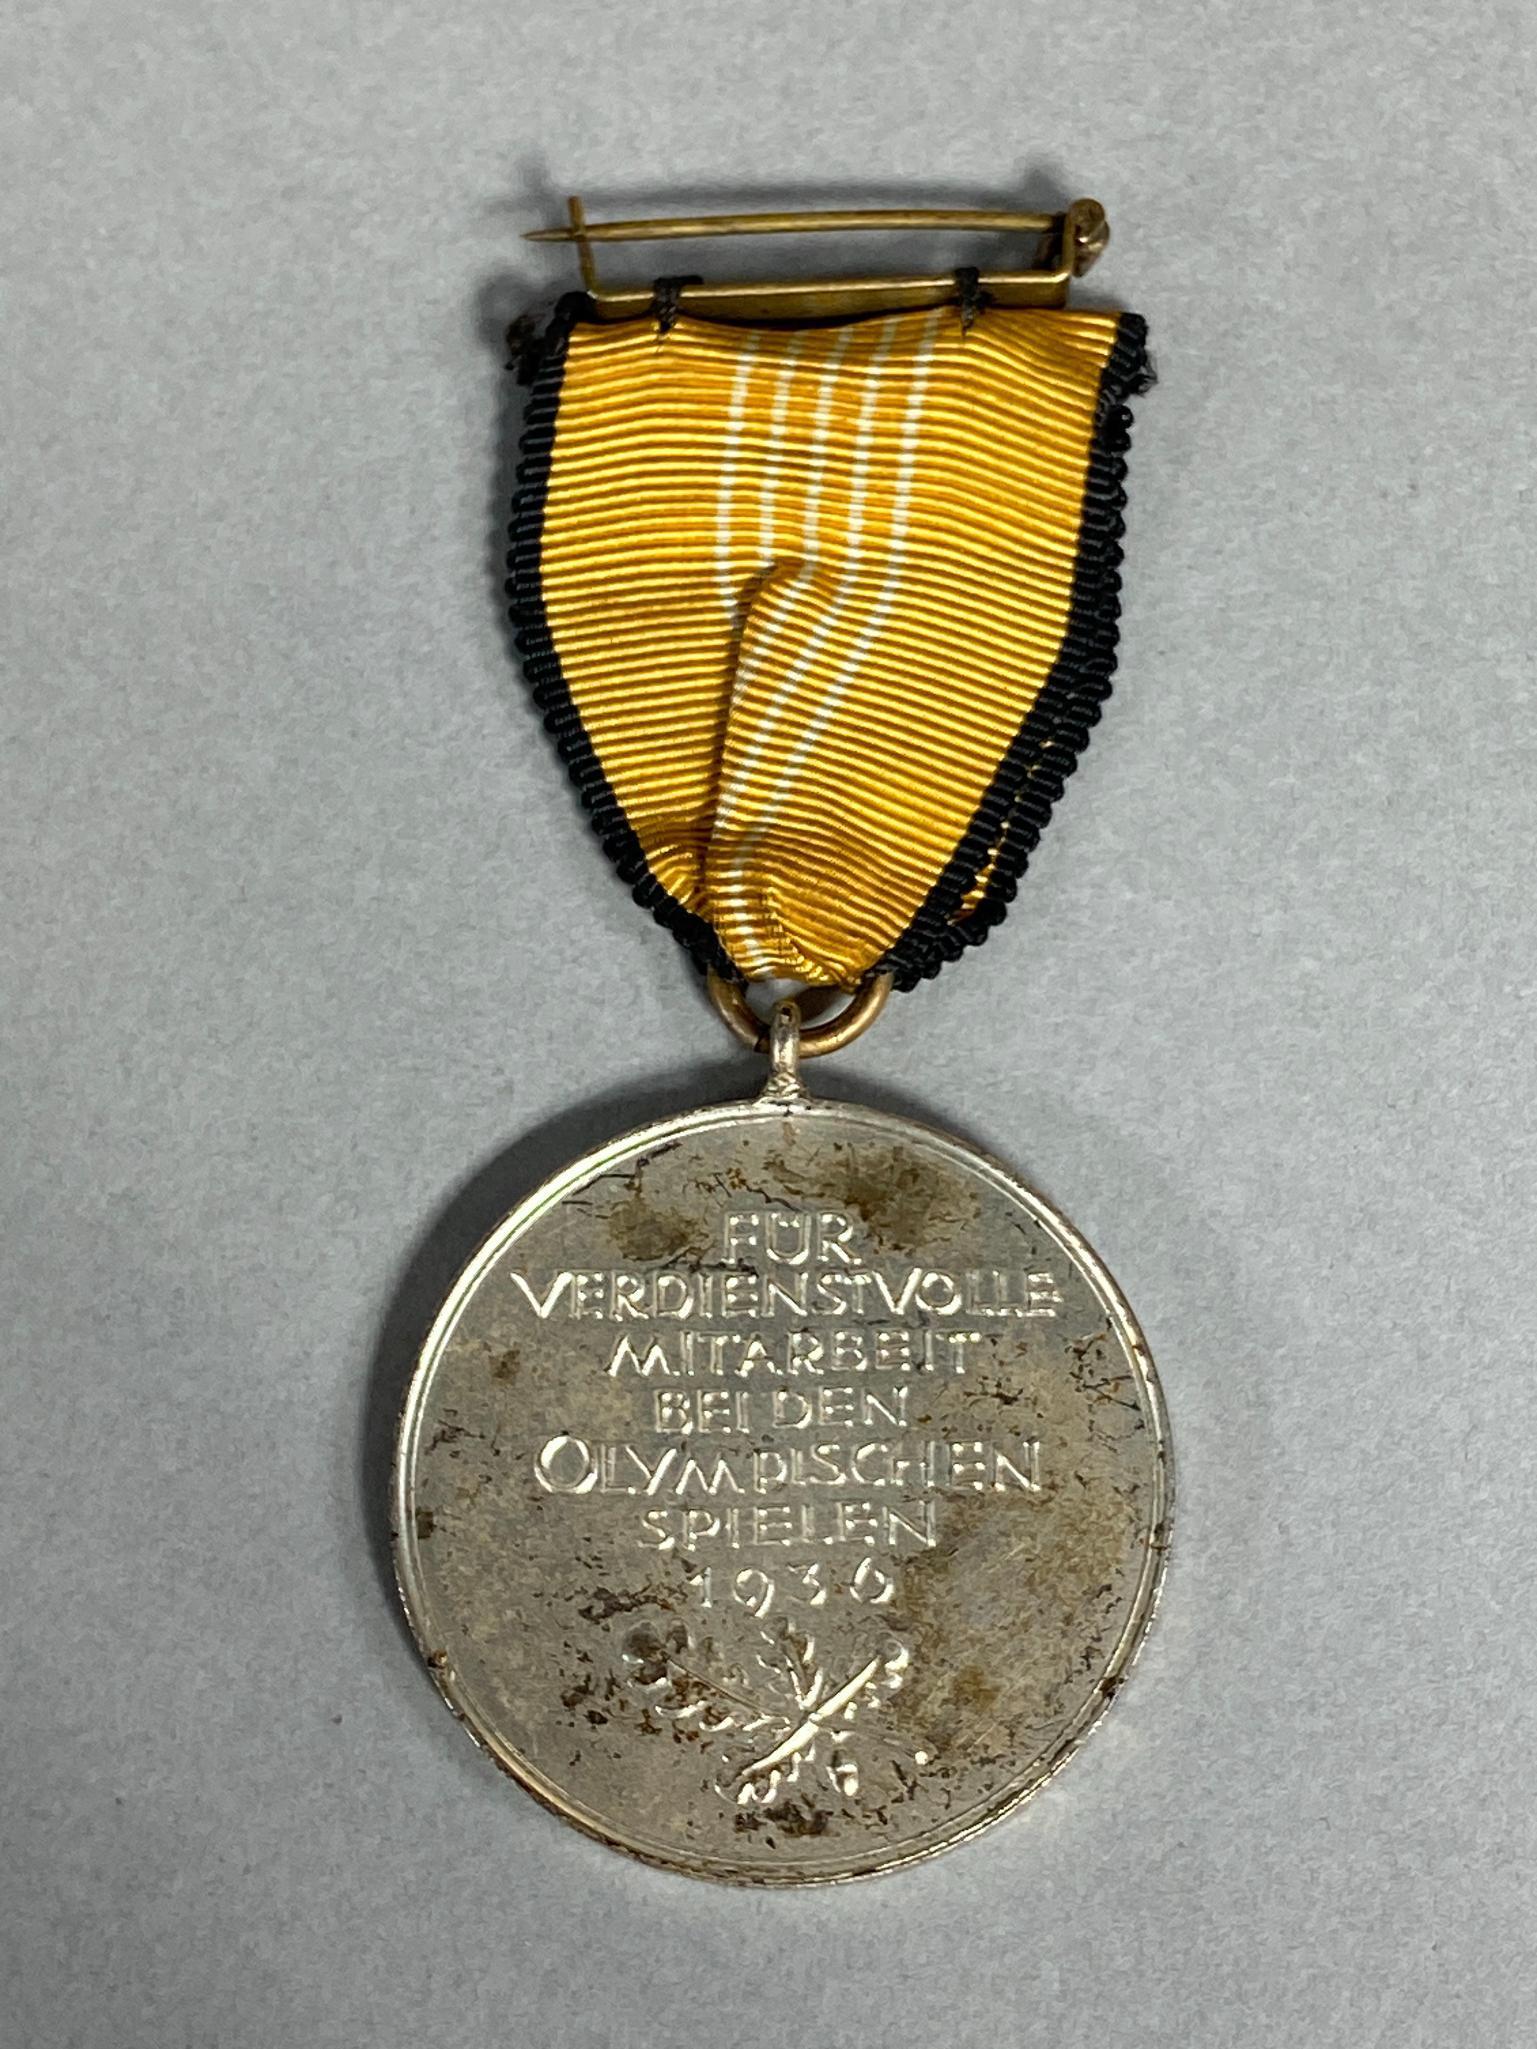 WWII GERMAN 1936 OLYMPICS COMMEMORATIVE MEDAL